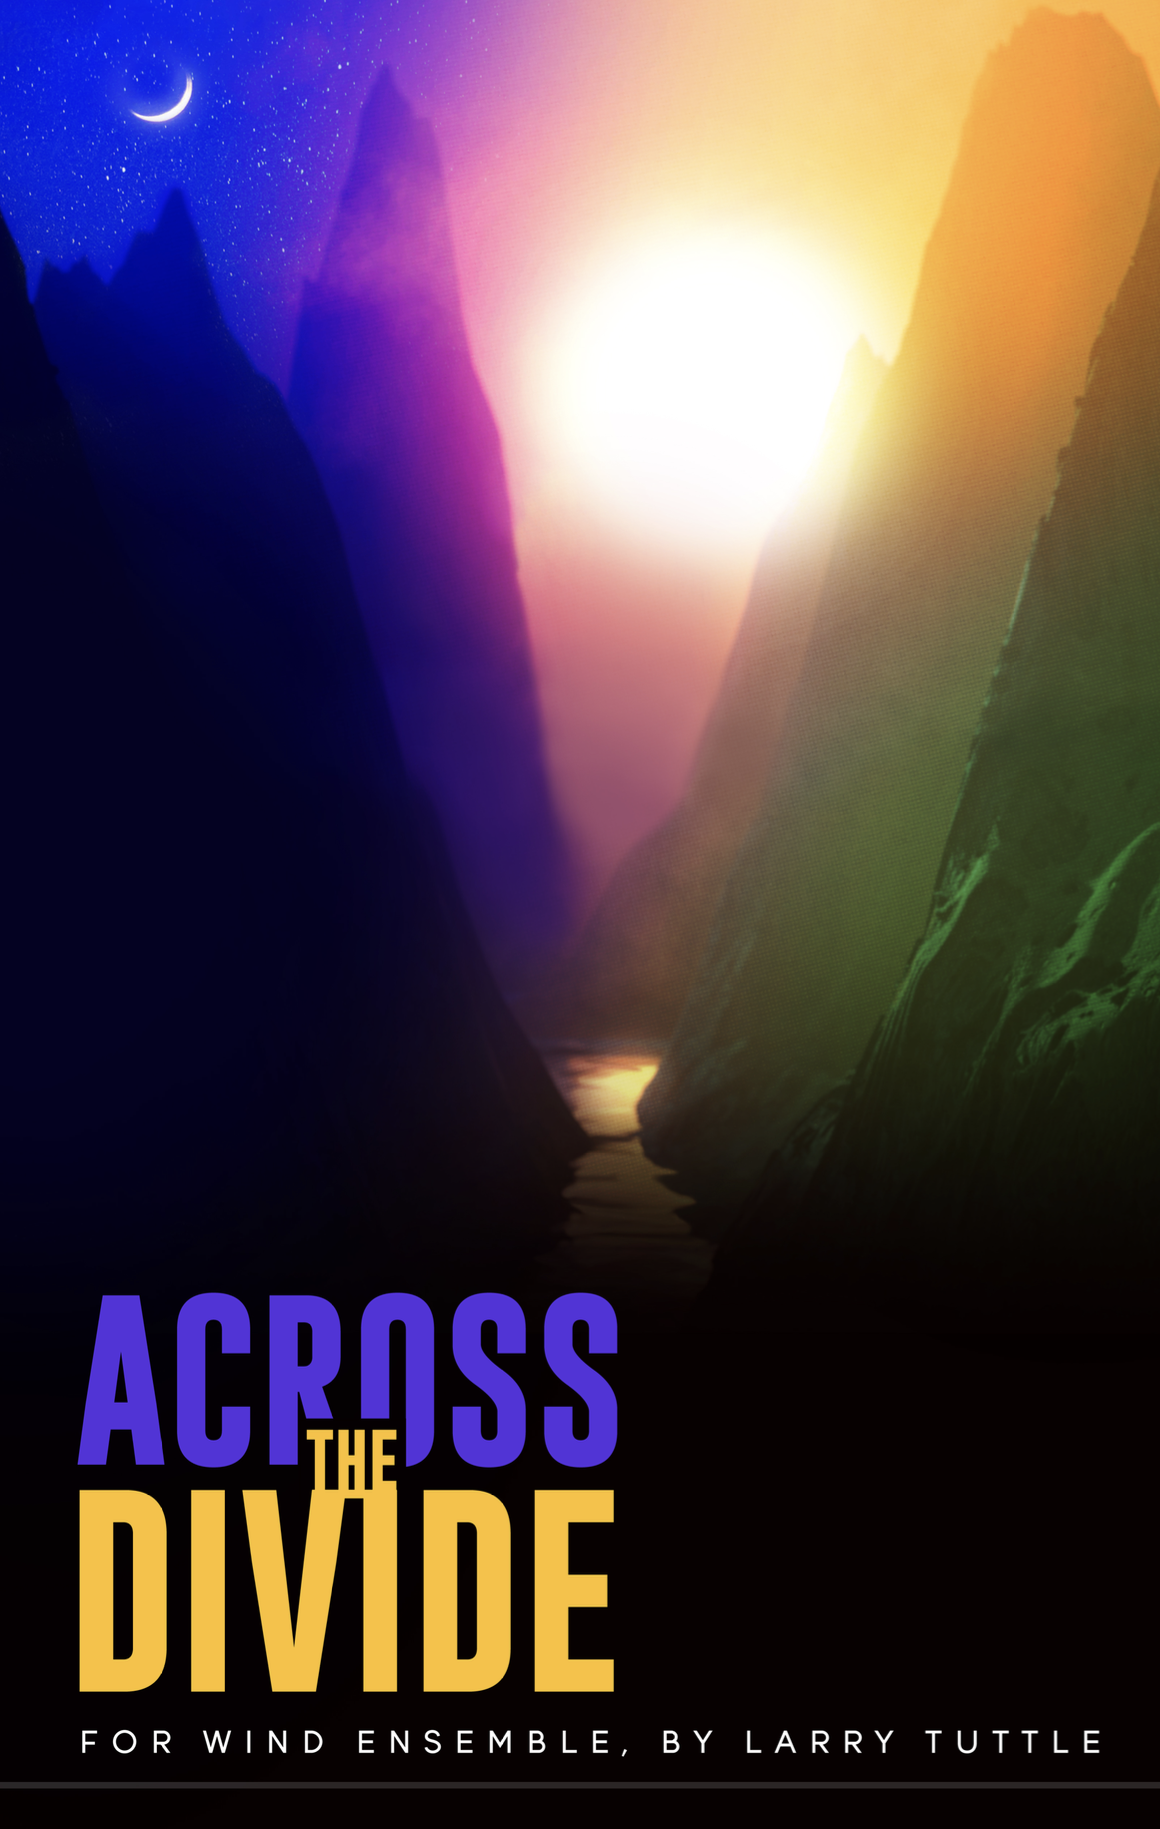 Across The Divide (Score Only) by Larry Tuttle